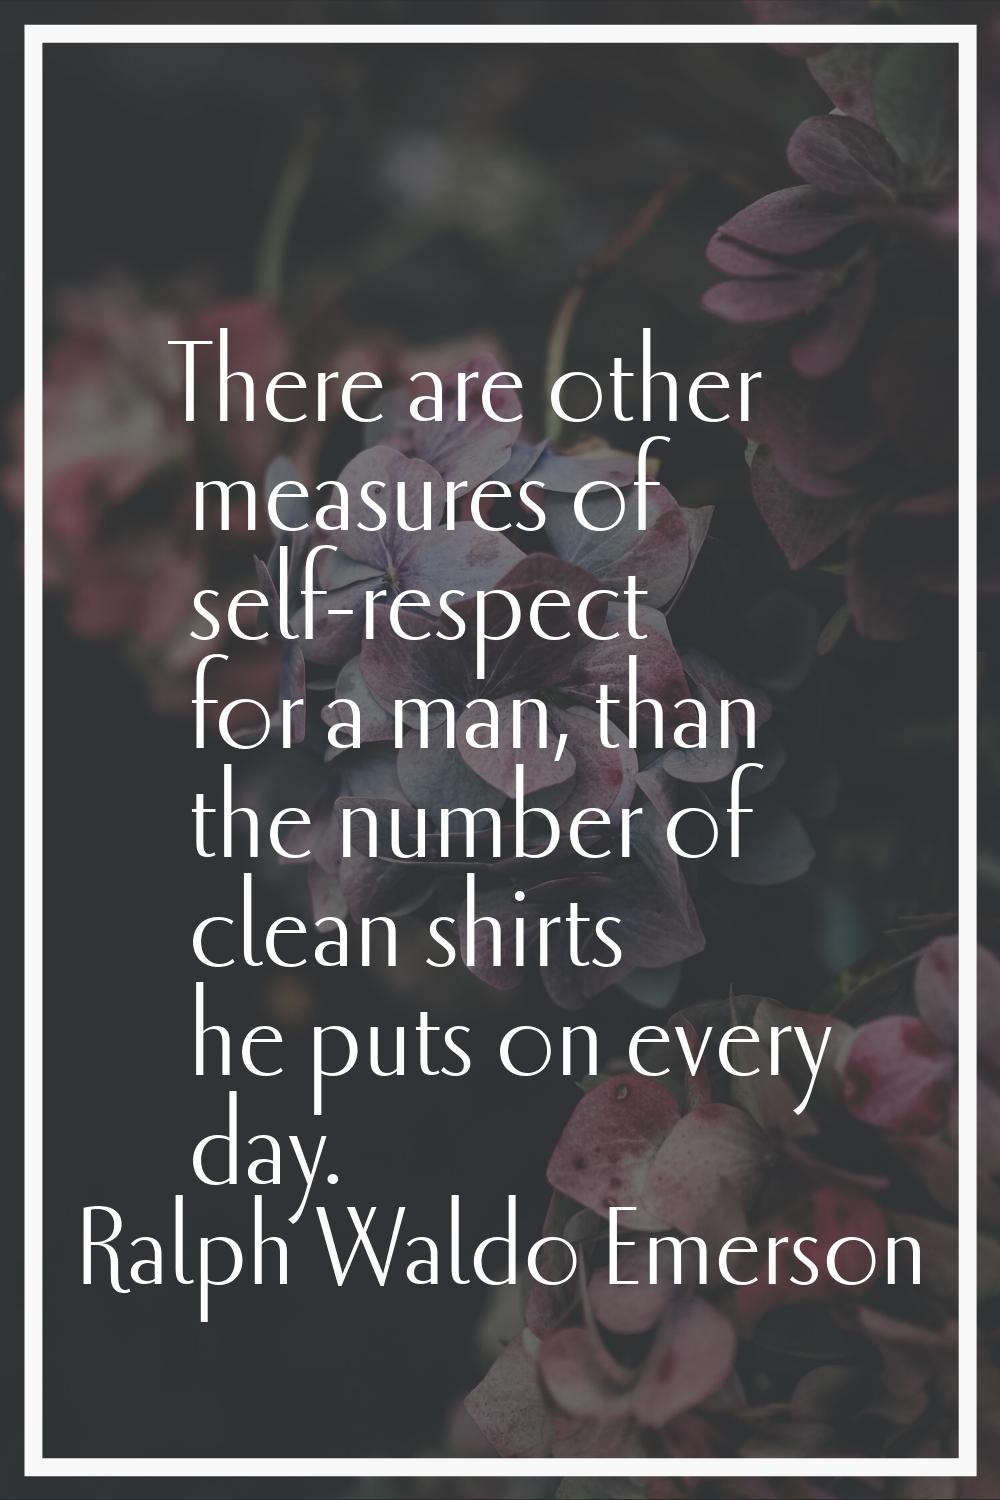 There are other measures of self-respect for a man, than the number of clean shirts he puts on ever